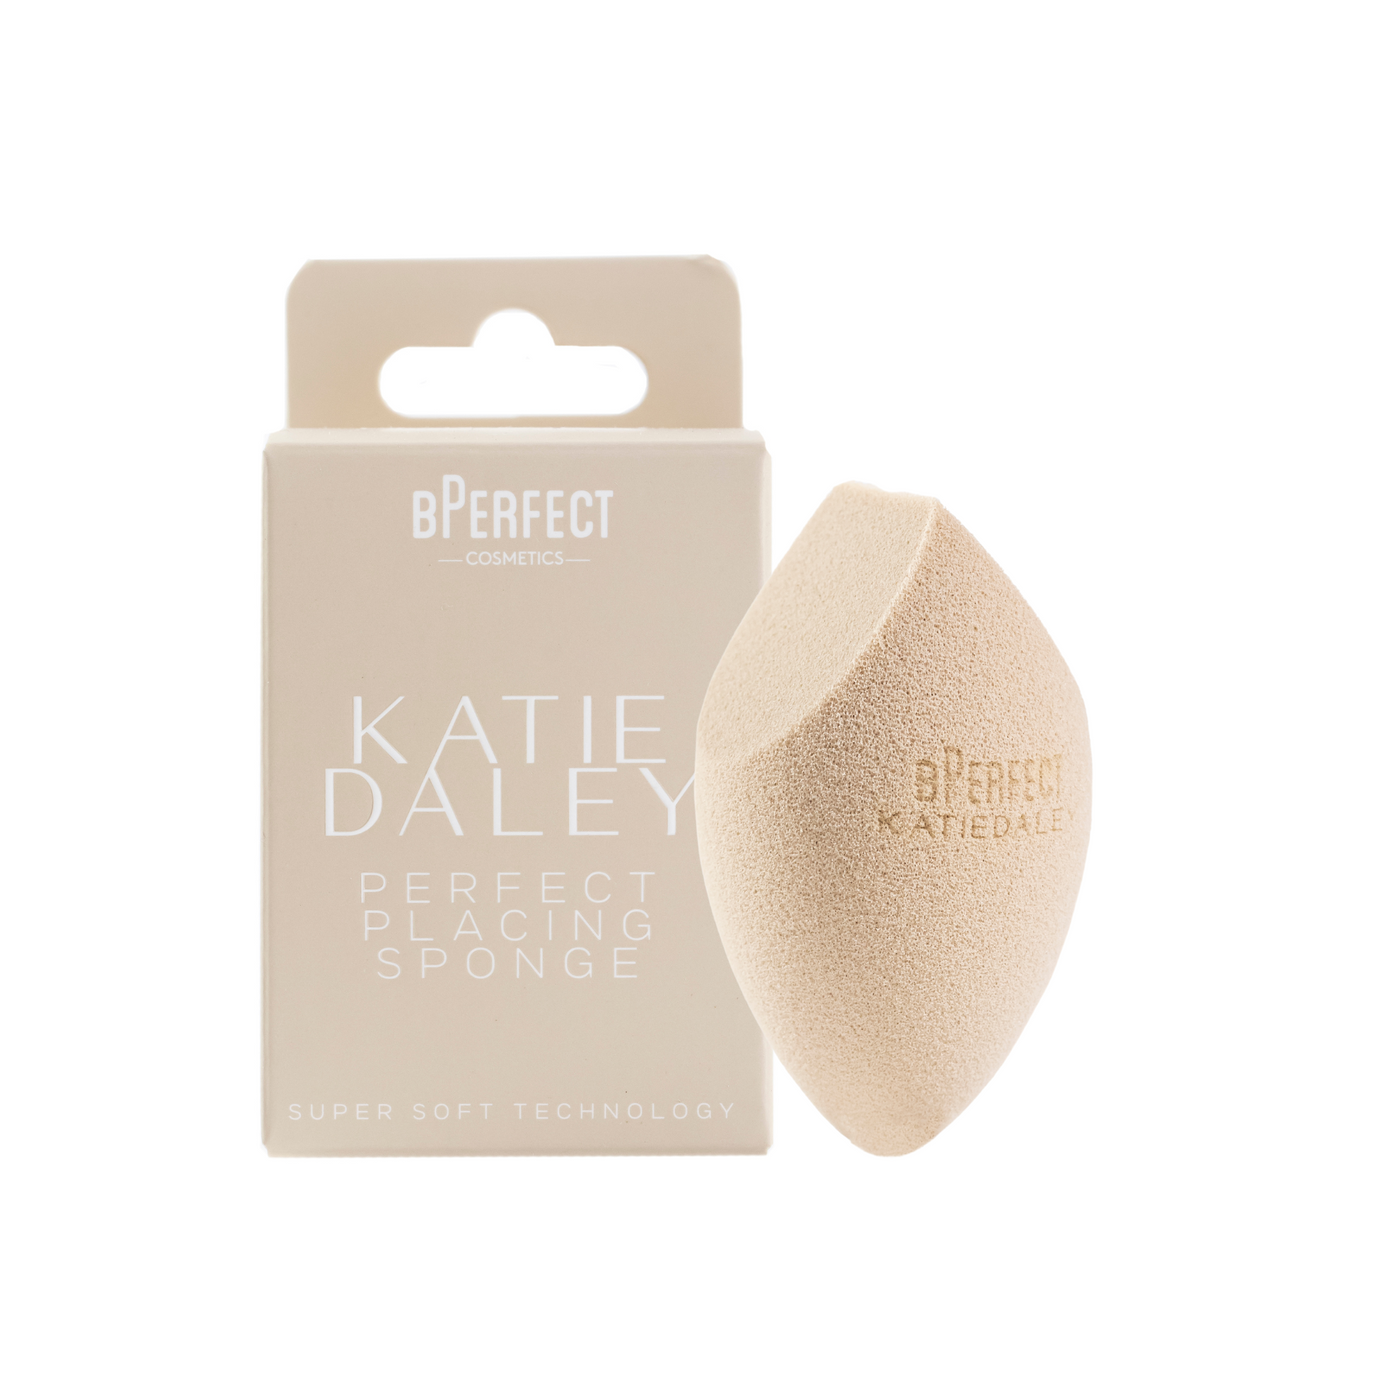 BPerfect x Katie Daley - The Collection